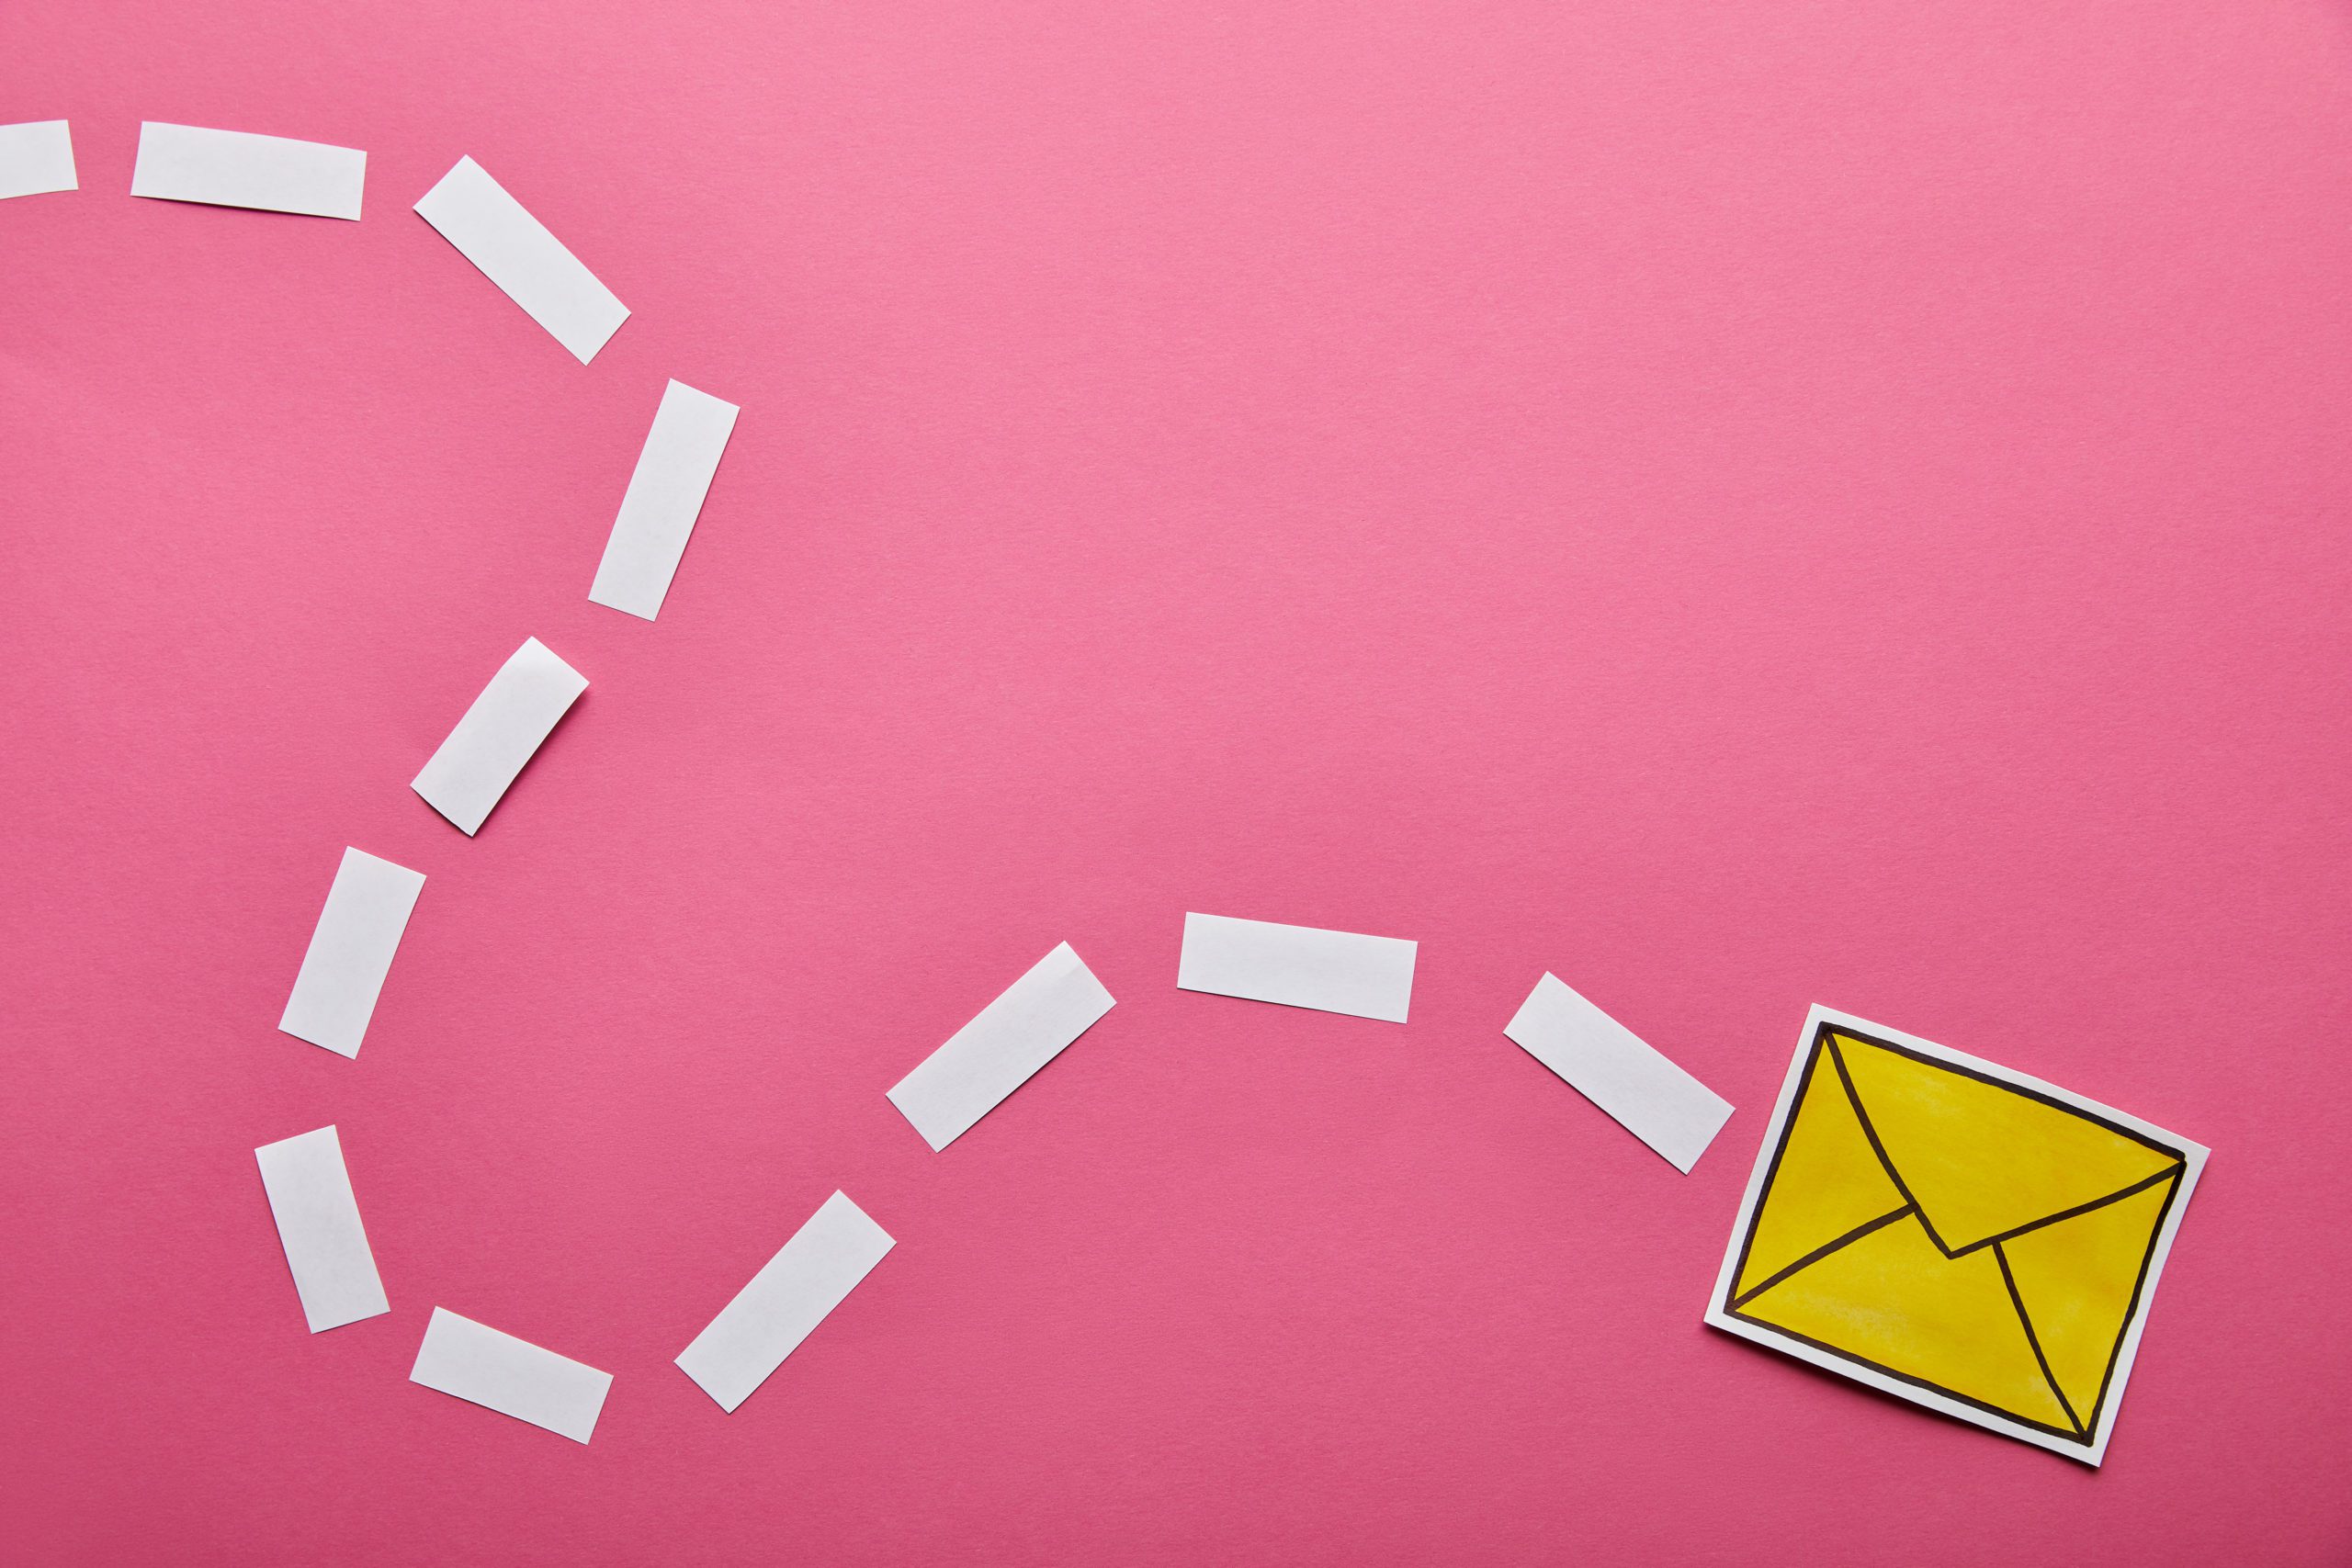 pink background. a paper-made email icon travels across the background